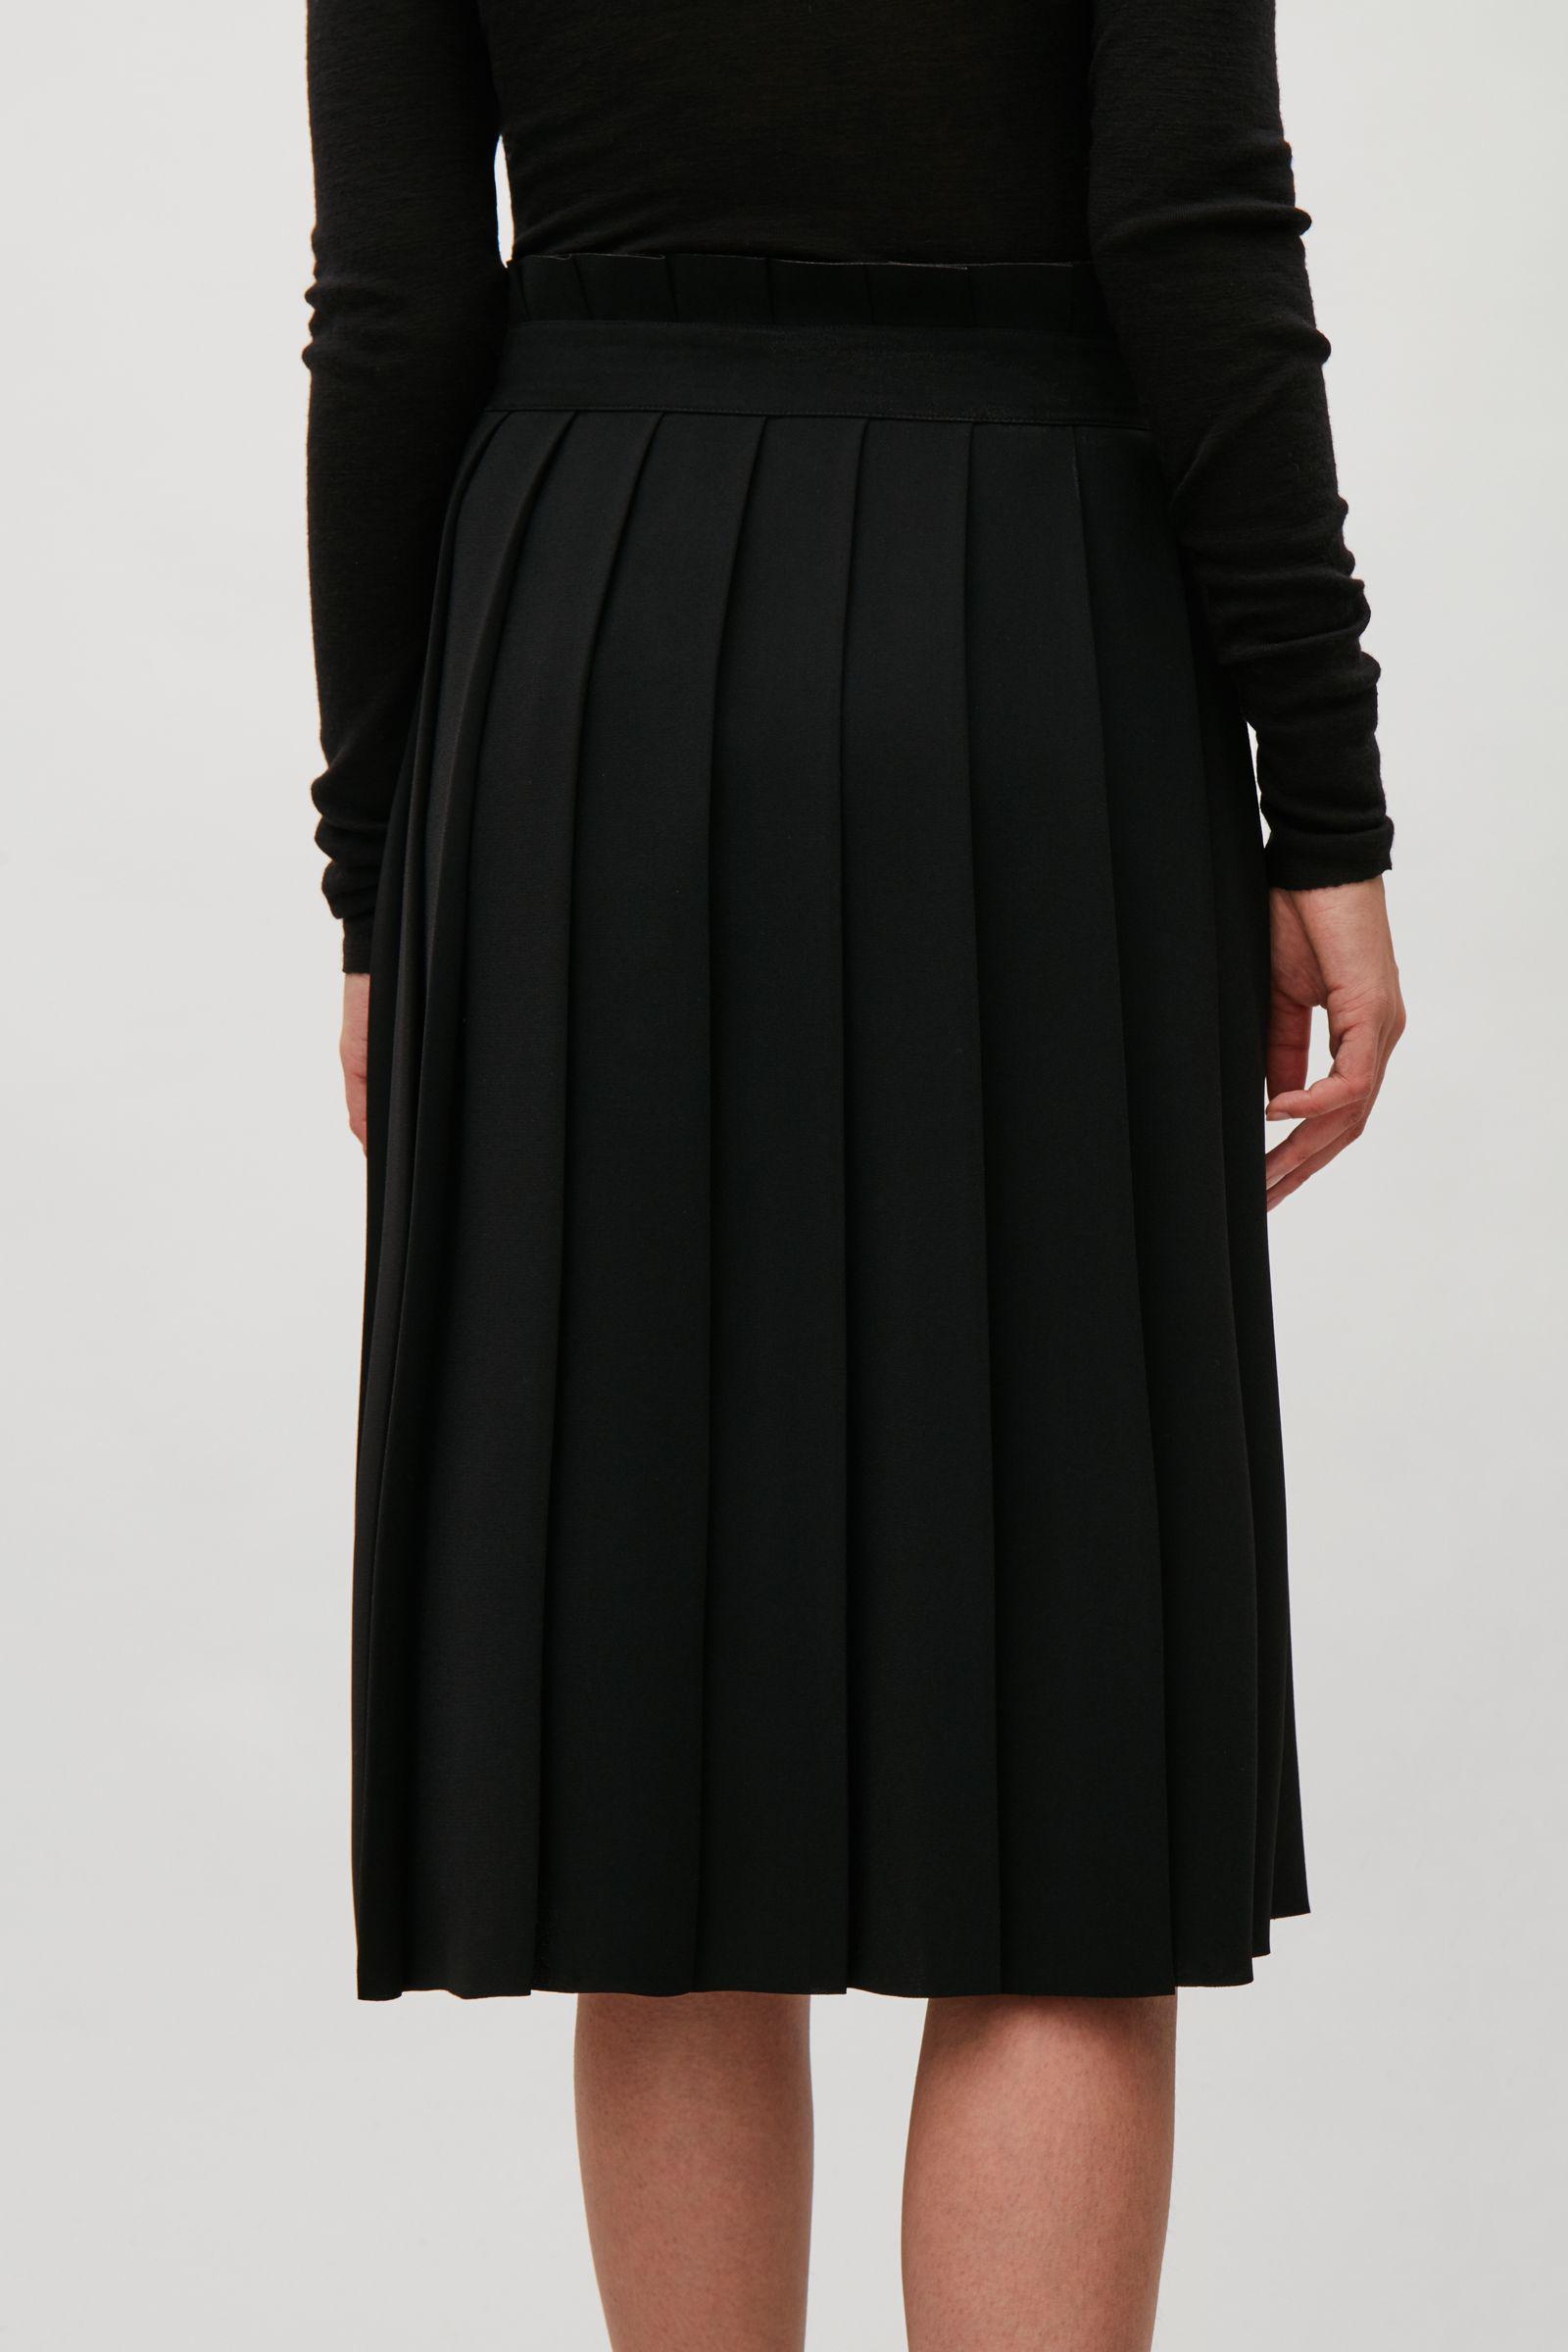 COS Synthetic Pleated Wrap Skirt in Black - Lyst